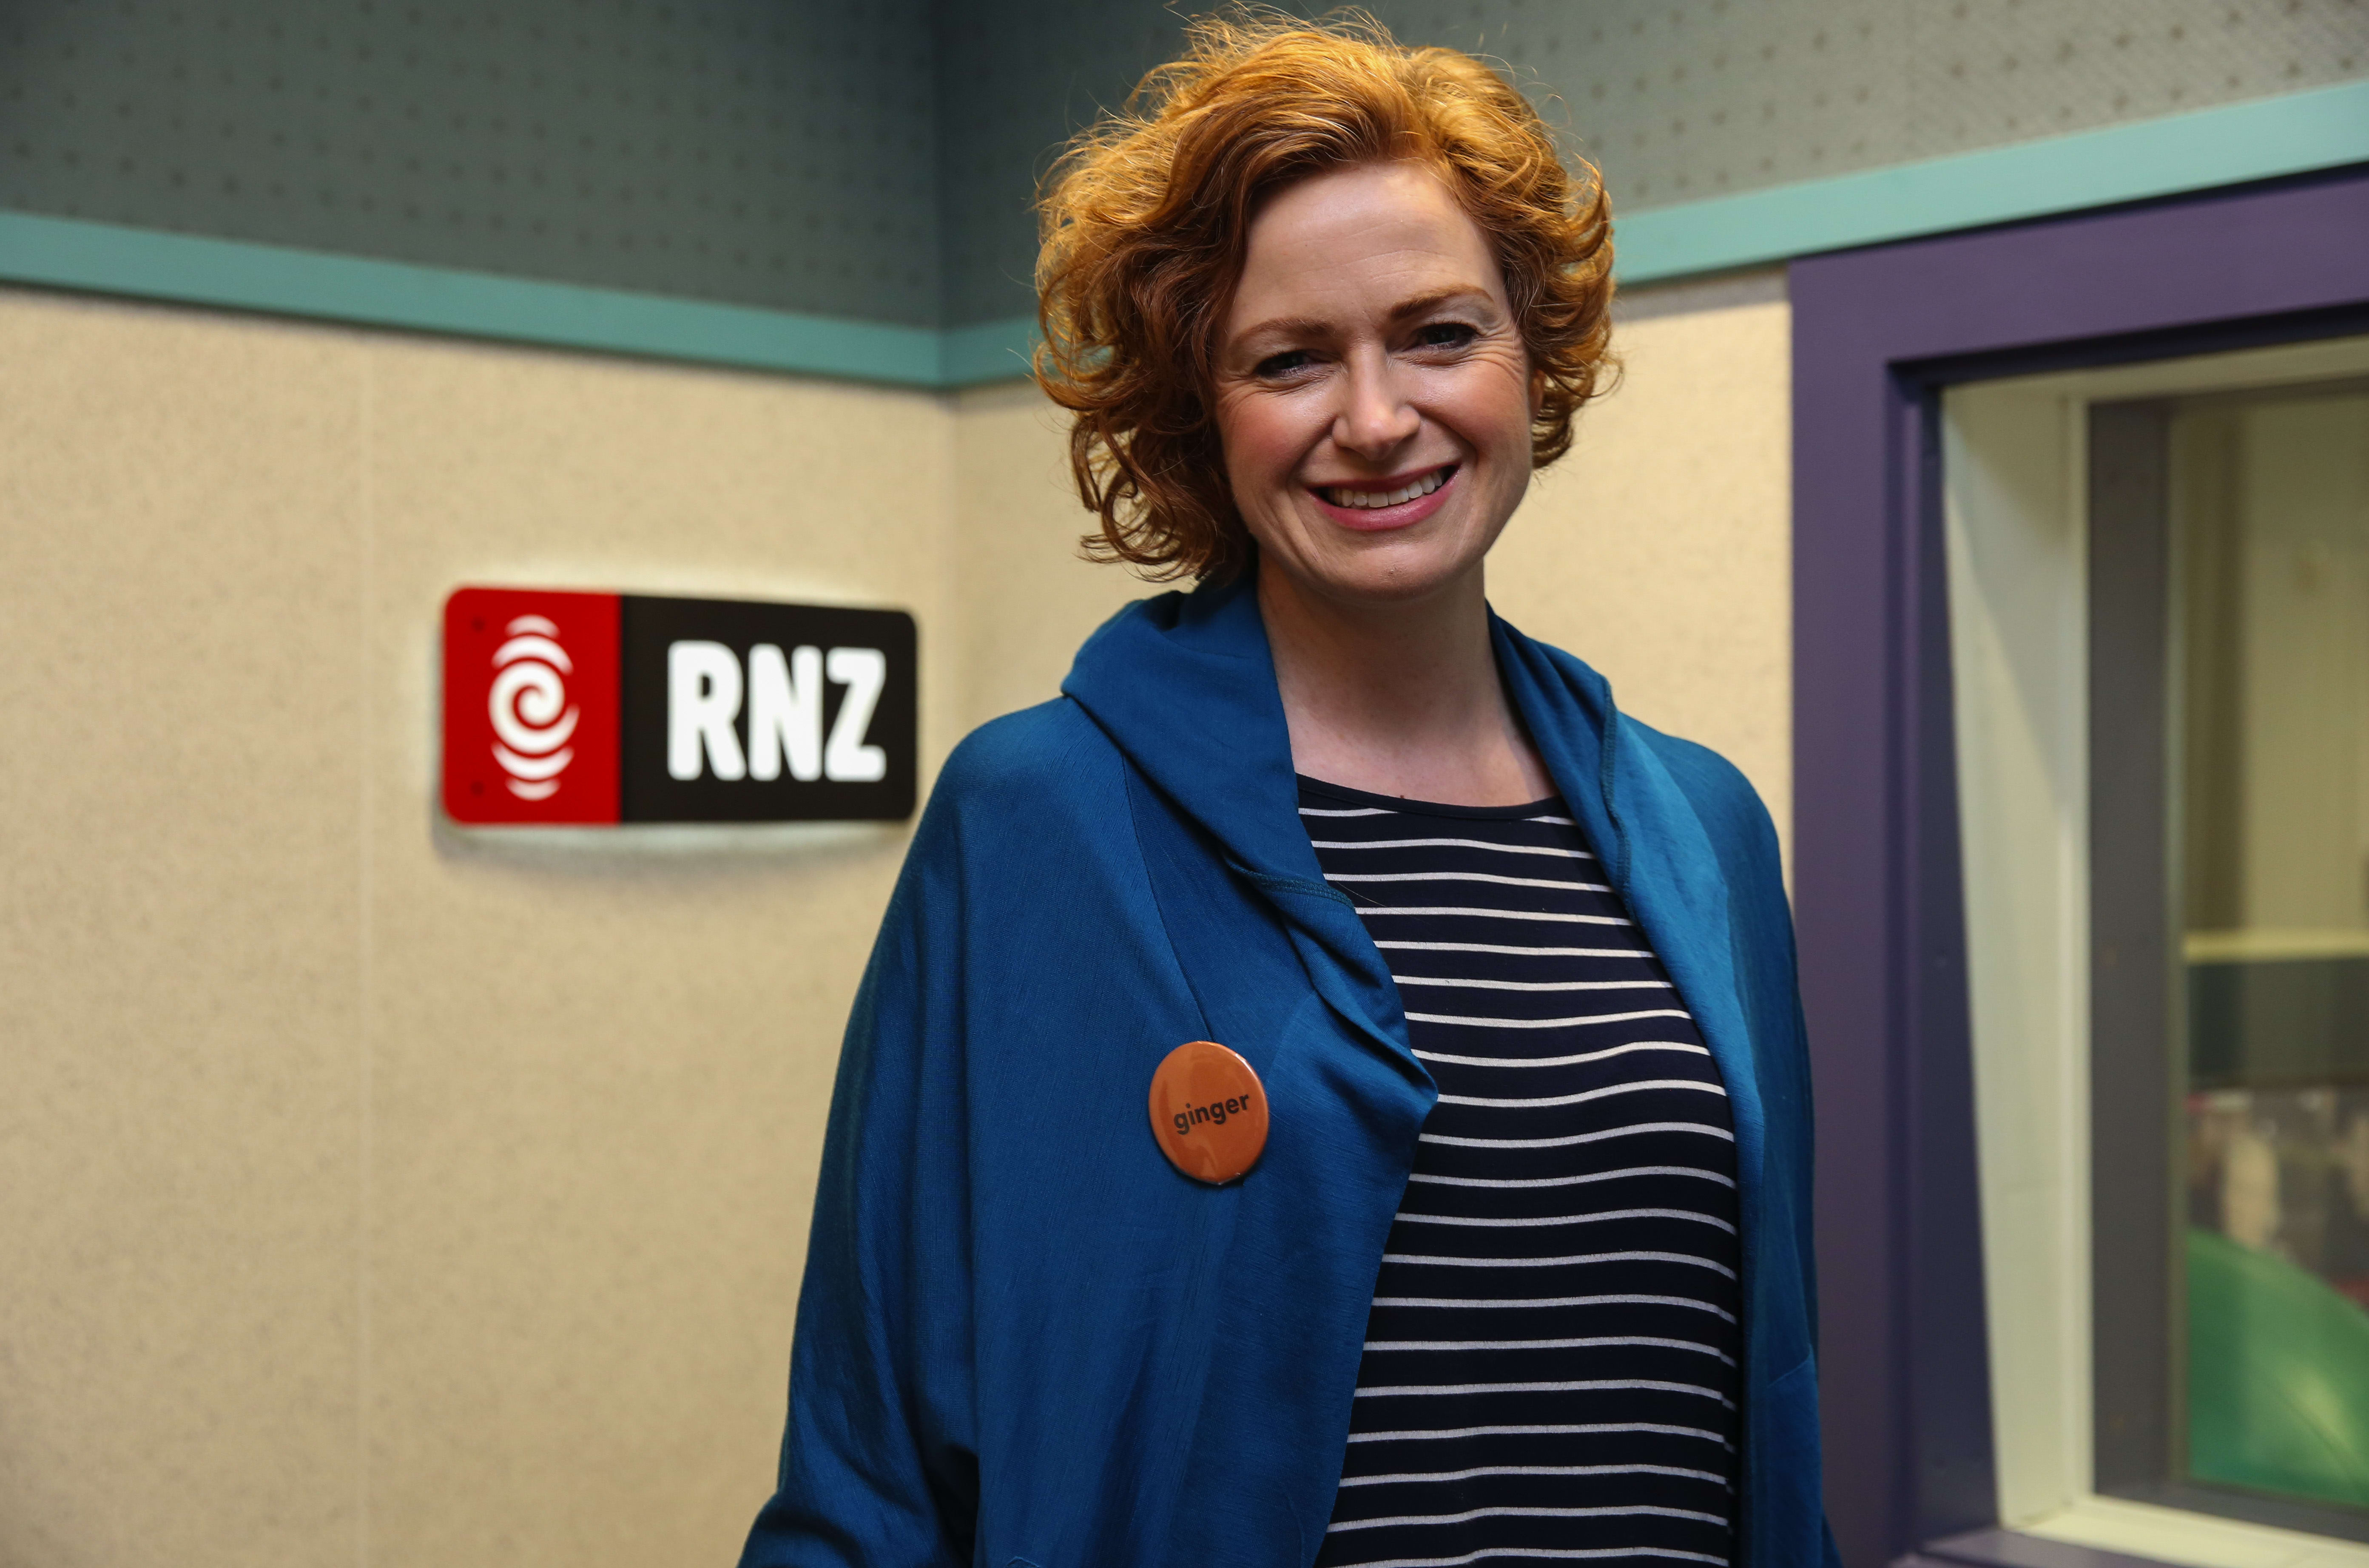 RNZ's Susie Ferguson proudly wears the ginger badge.